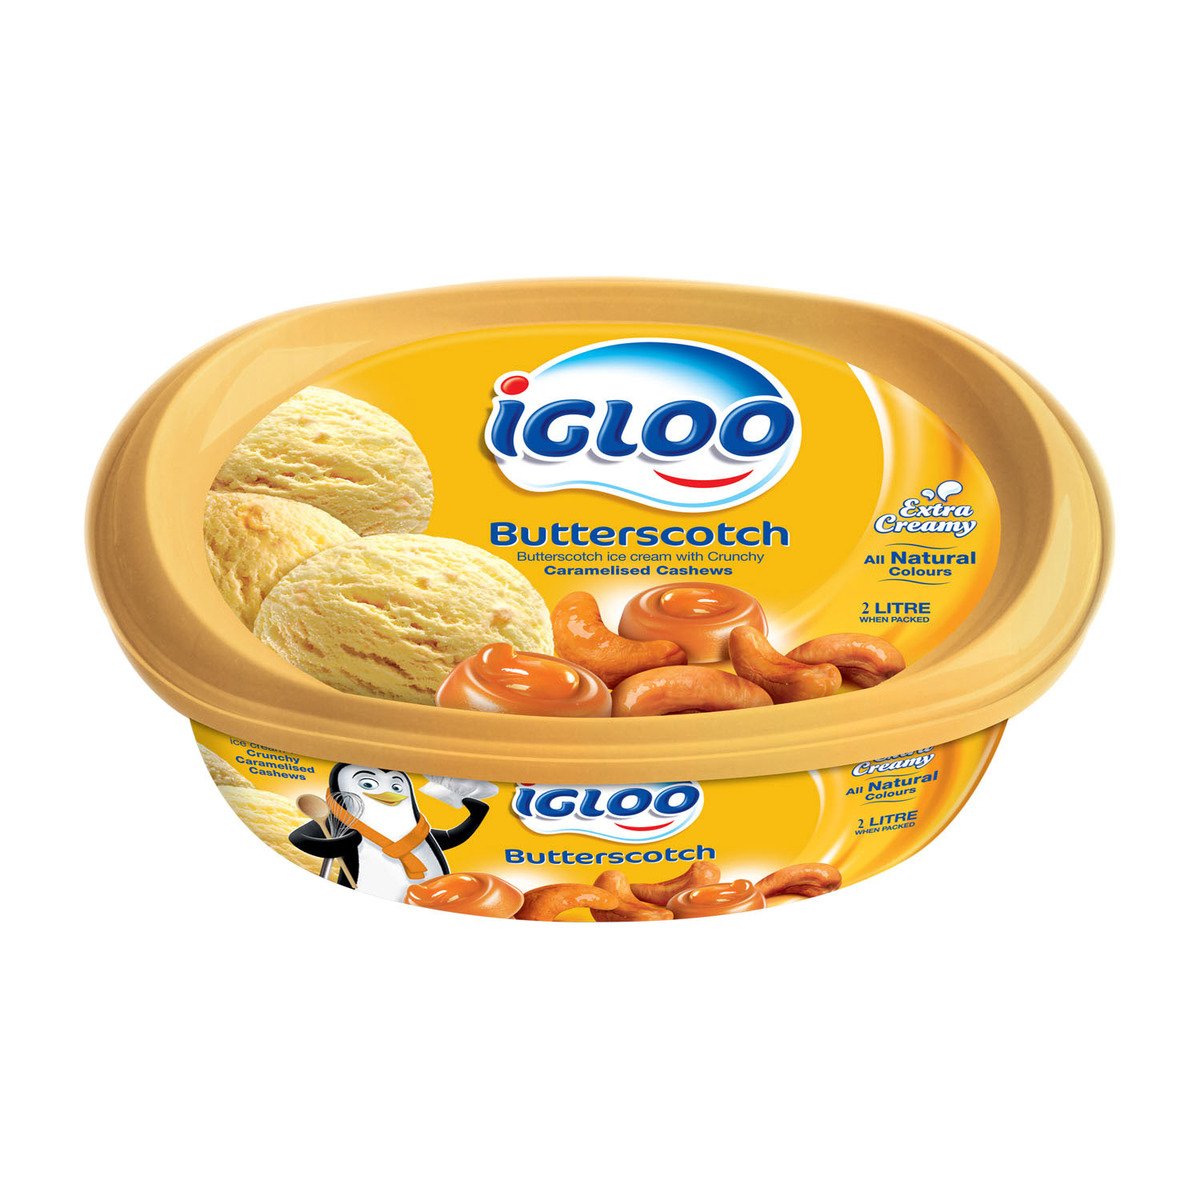 Igloo Butterscotch Ice Cream 2 Litres